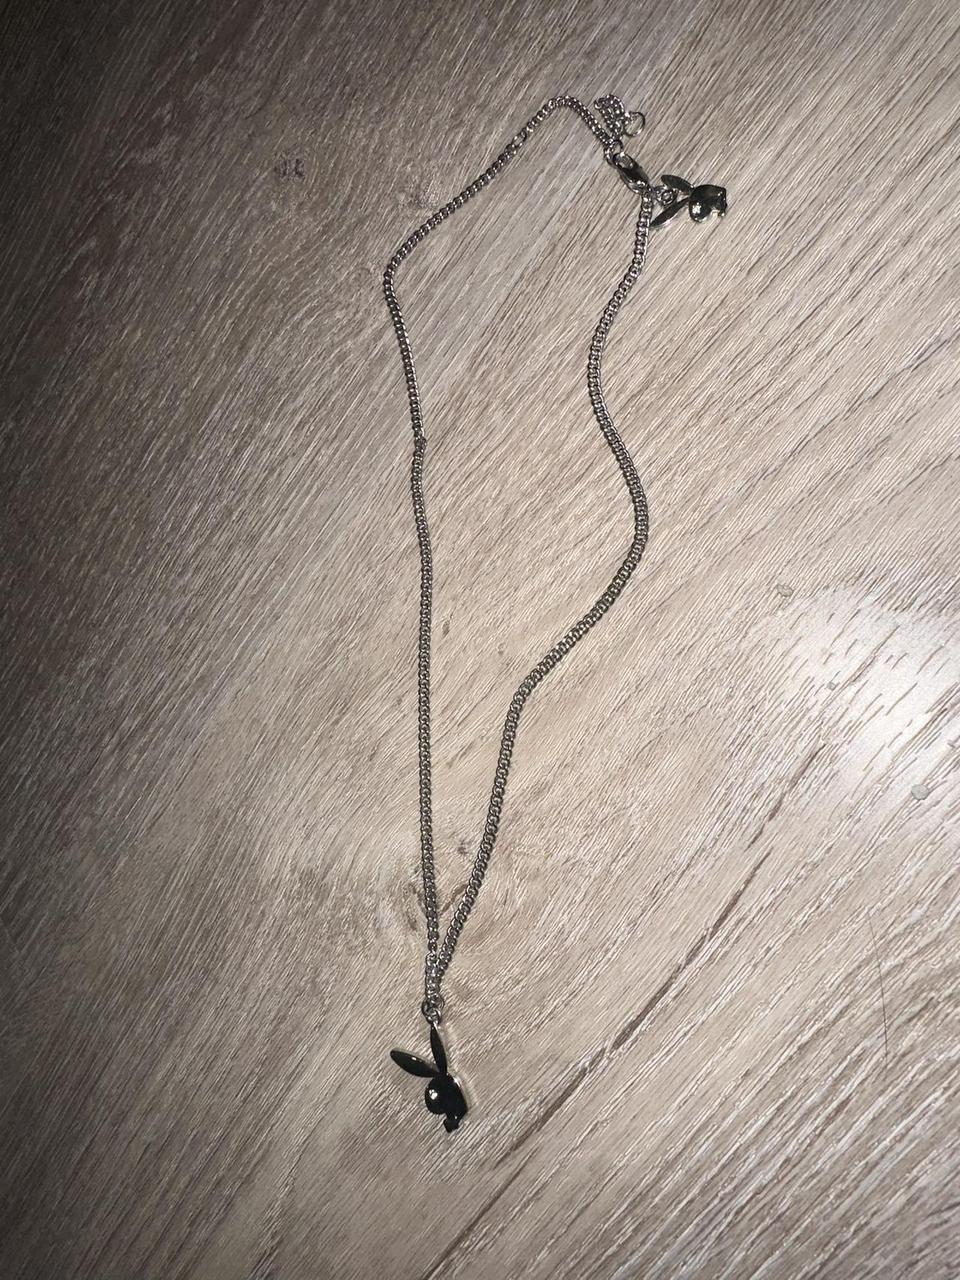 Misguided Playboy bunny silver necklace perfect... - Depop